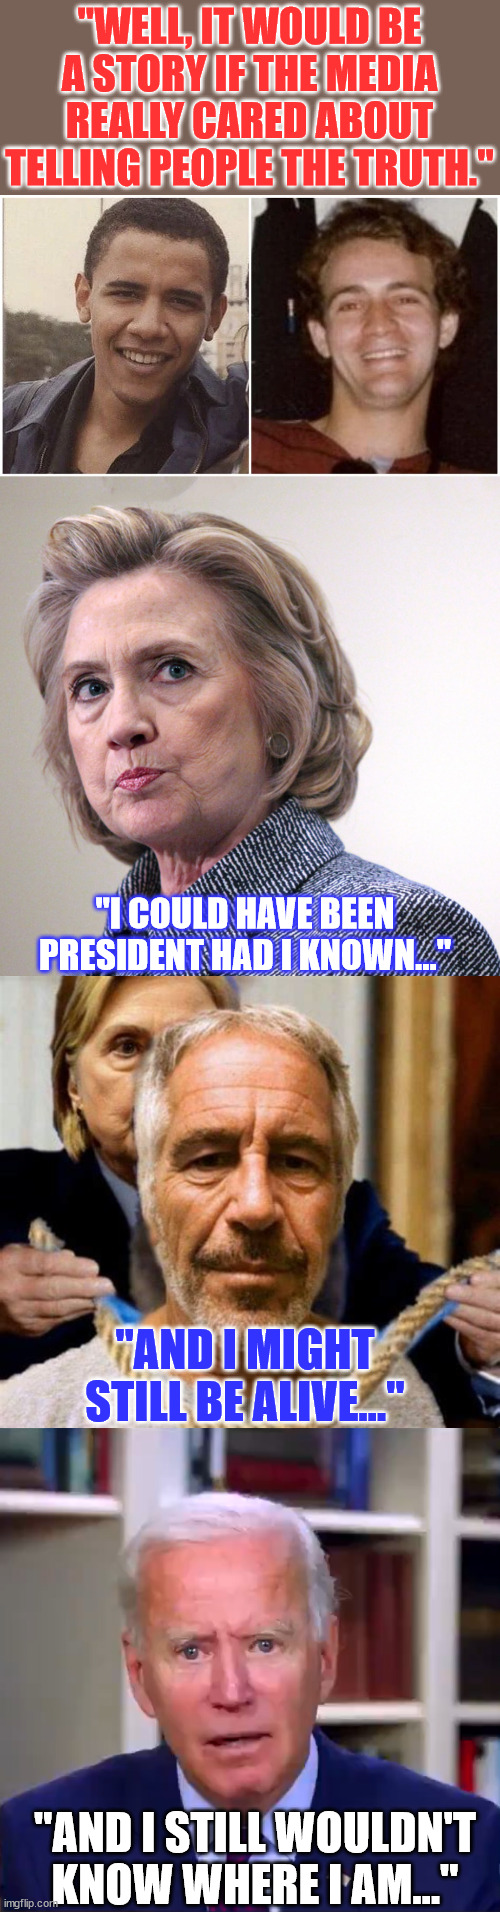 If only the misleadia had told the truth... | "WELL, IT WOULD BE A STORY IF THE MEDIA REALLY CARED ABOUT TELLING PEOPLE THE TRUTH."; "I COULD HAVE BEEN PRESIDENT HAD I KNOWN..."; "AND I MIGHT STILL BE ALIVE..."; "AND I STILL WOULDN'T KNOW WHERE I AM..." | image tagged in hillary clinton pissed,slow joe biden dementia face,mainstream media,liars,homosexual,barack obama | made w/ Imgflip meme maker